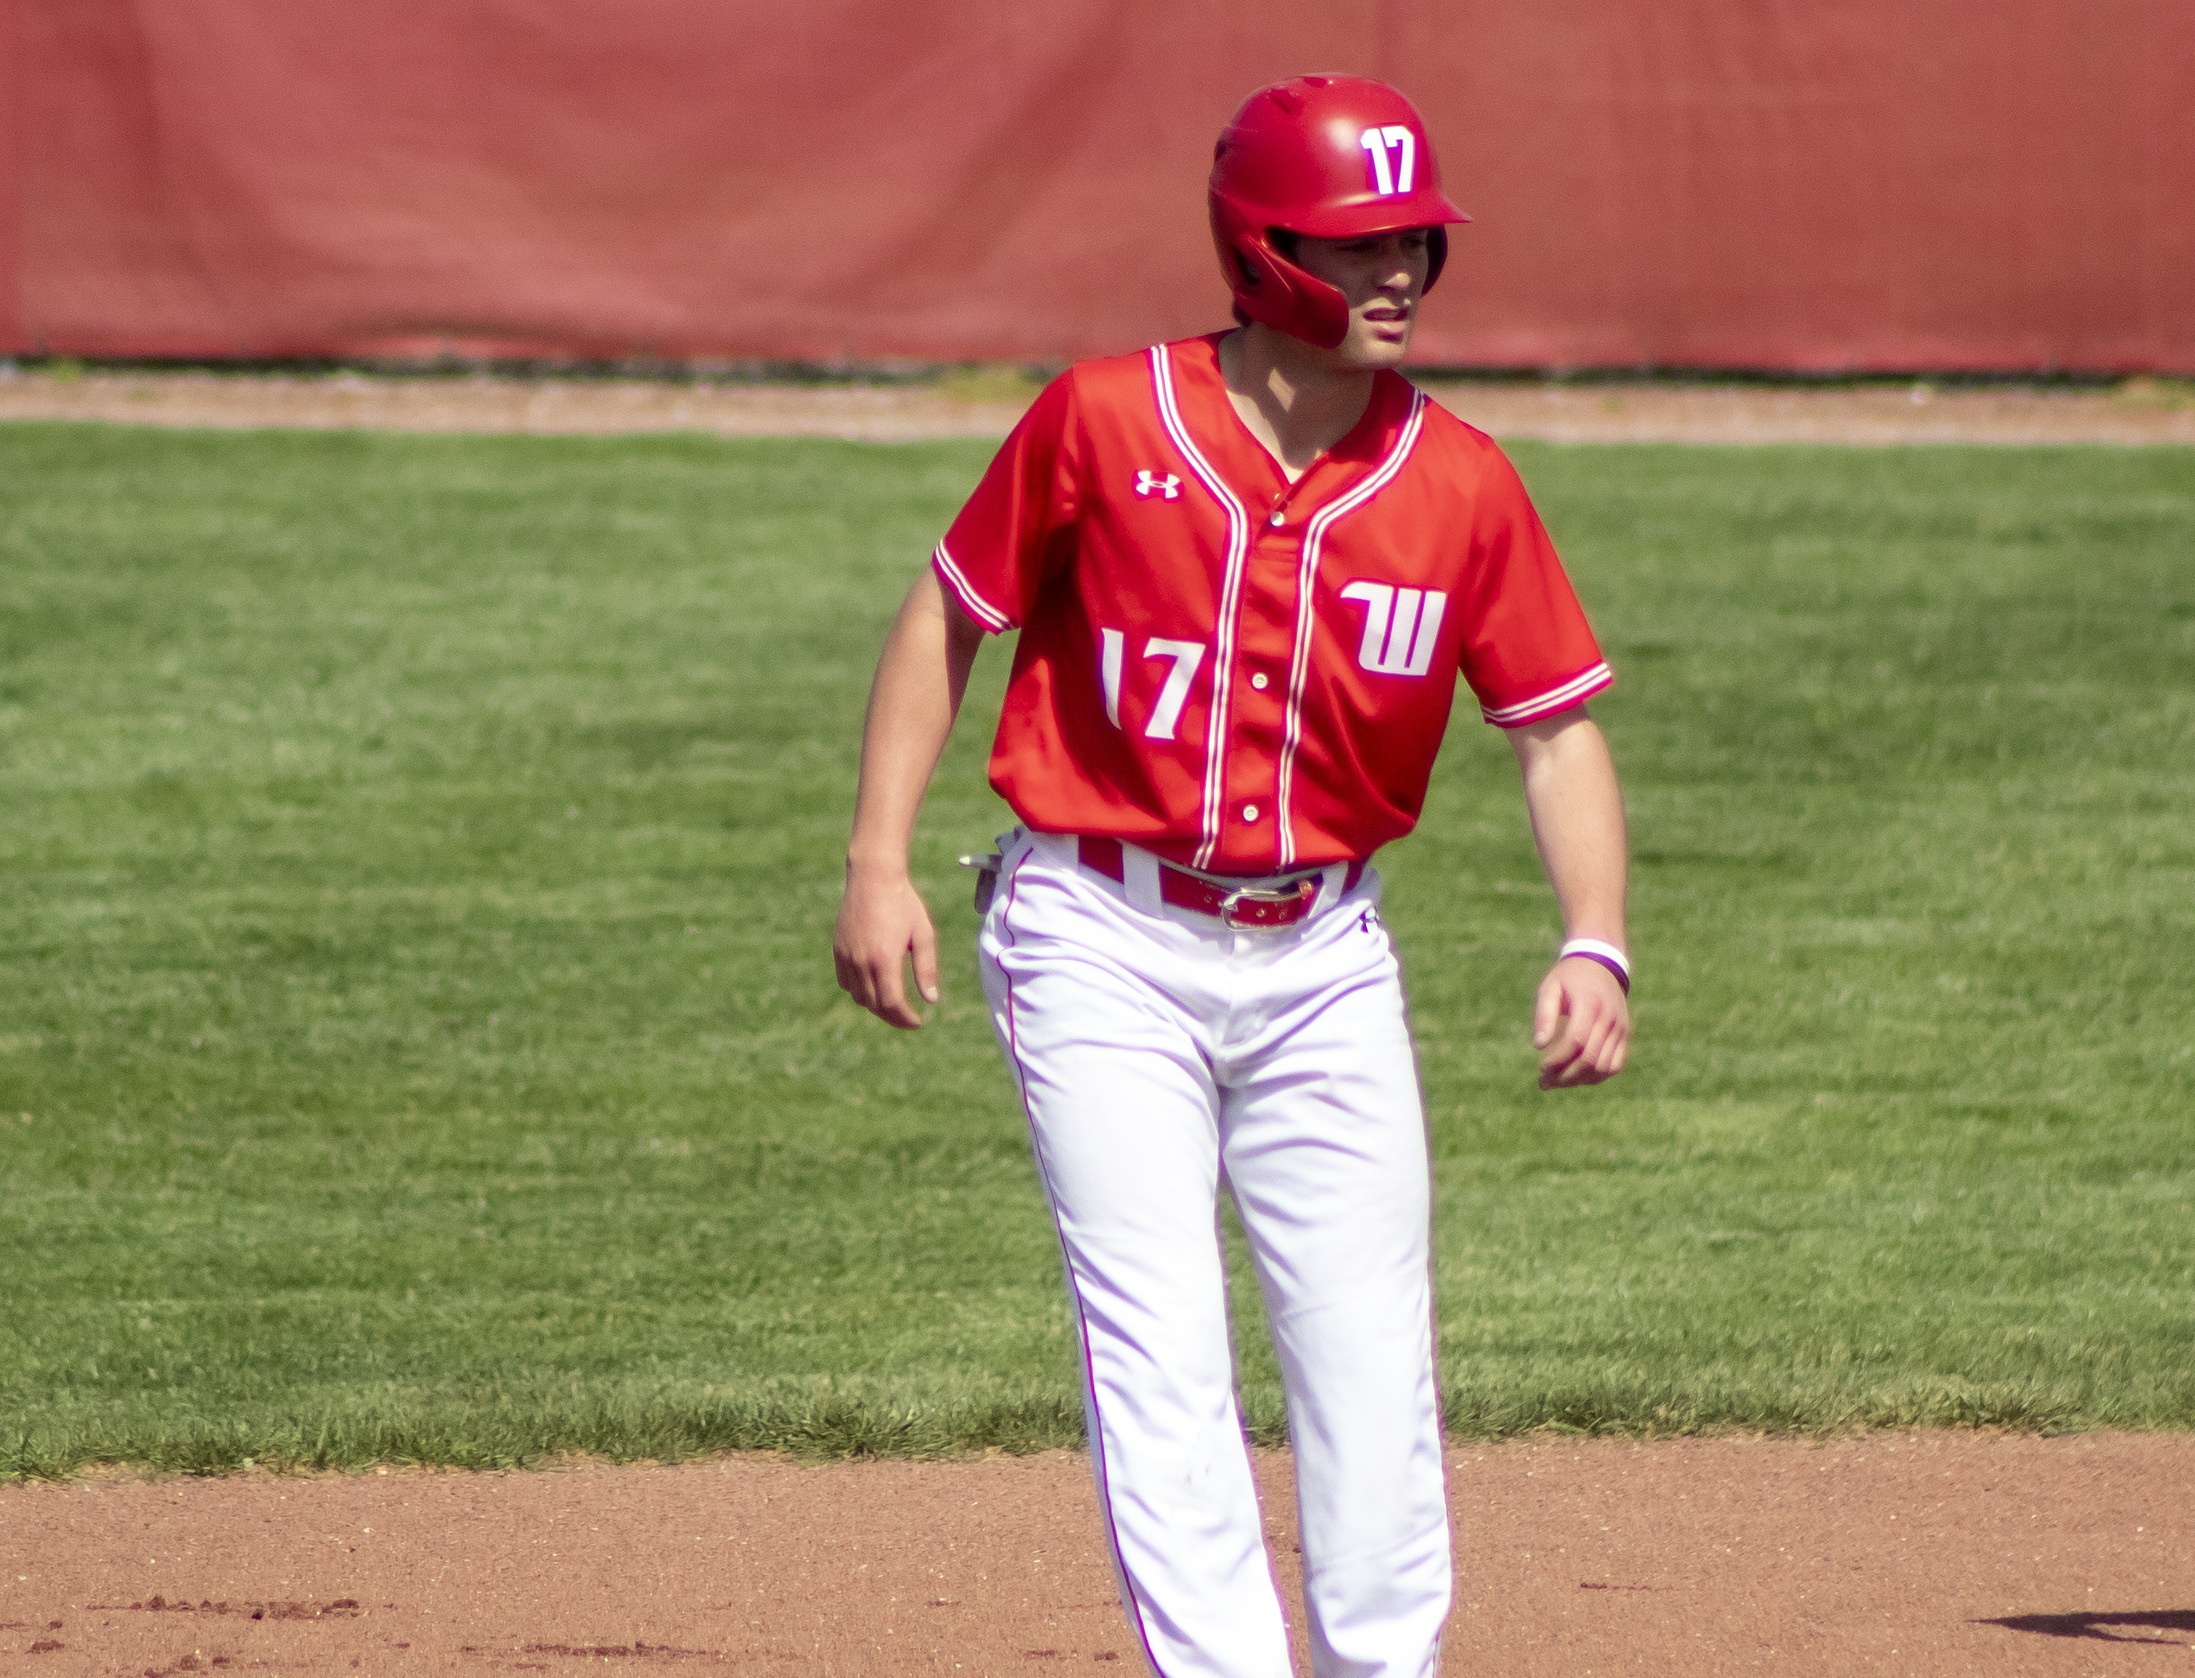 Senior Luke Thomas led the Wittenberg offense with eight hits, including three doubles, and three RBIs in a doubleheader split at Ferrum on Saturday.